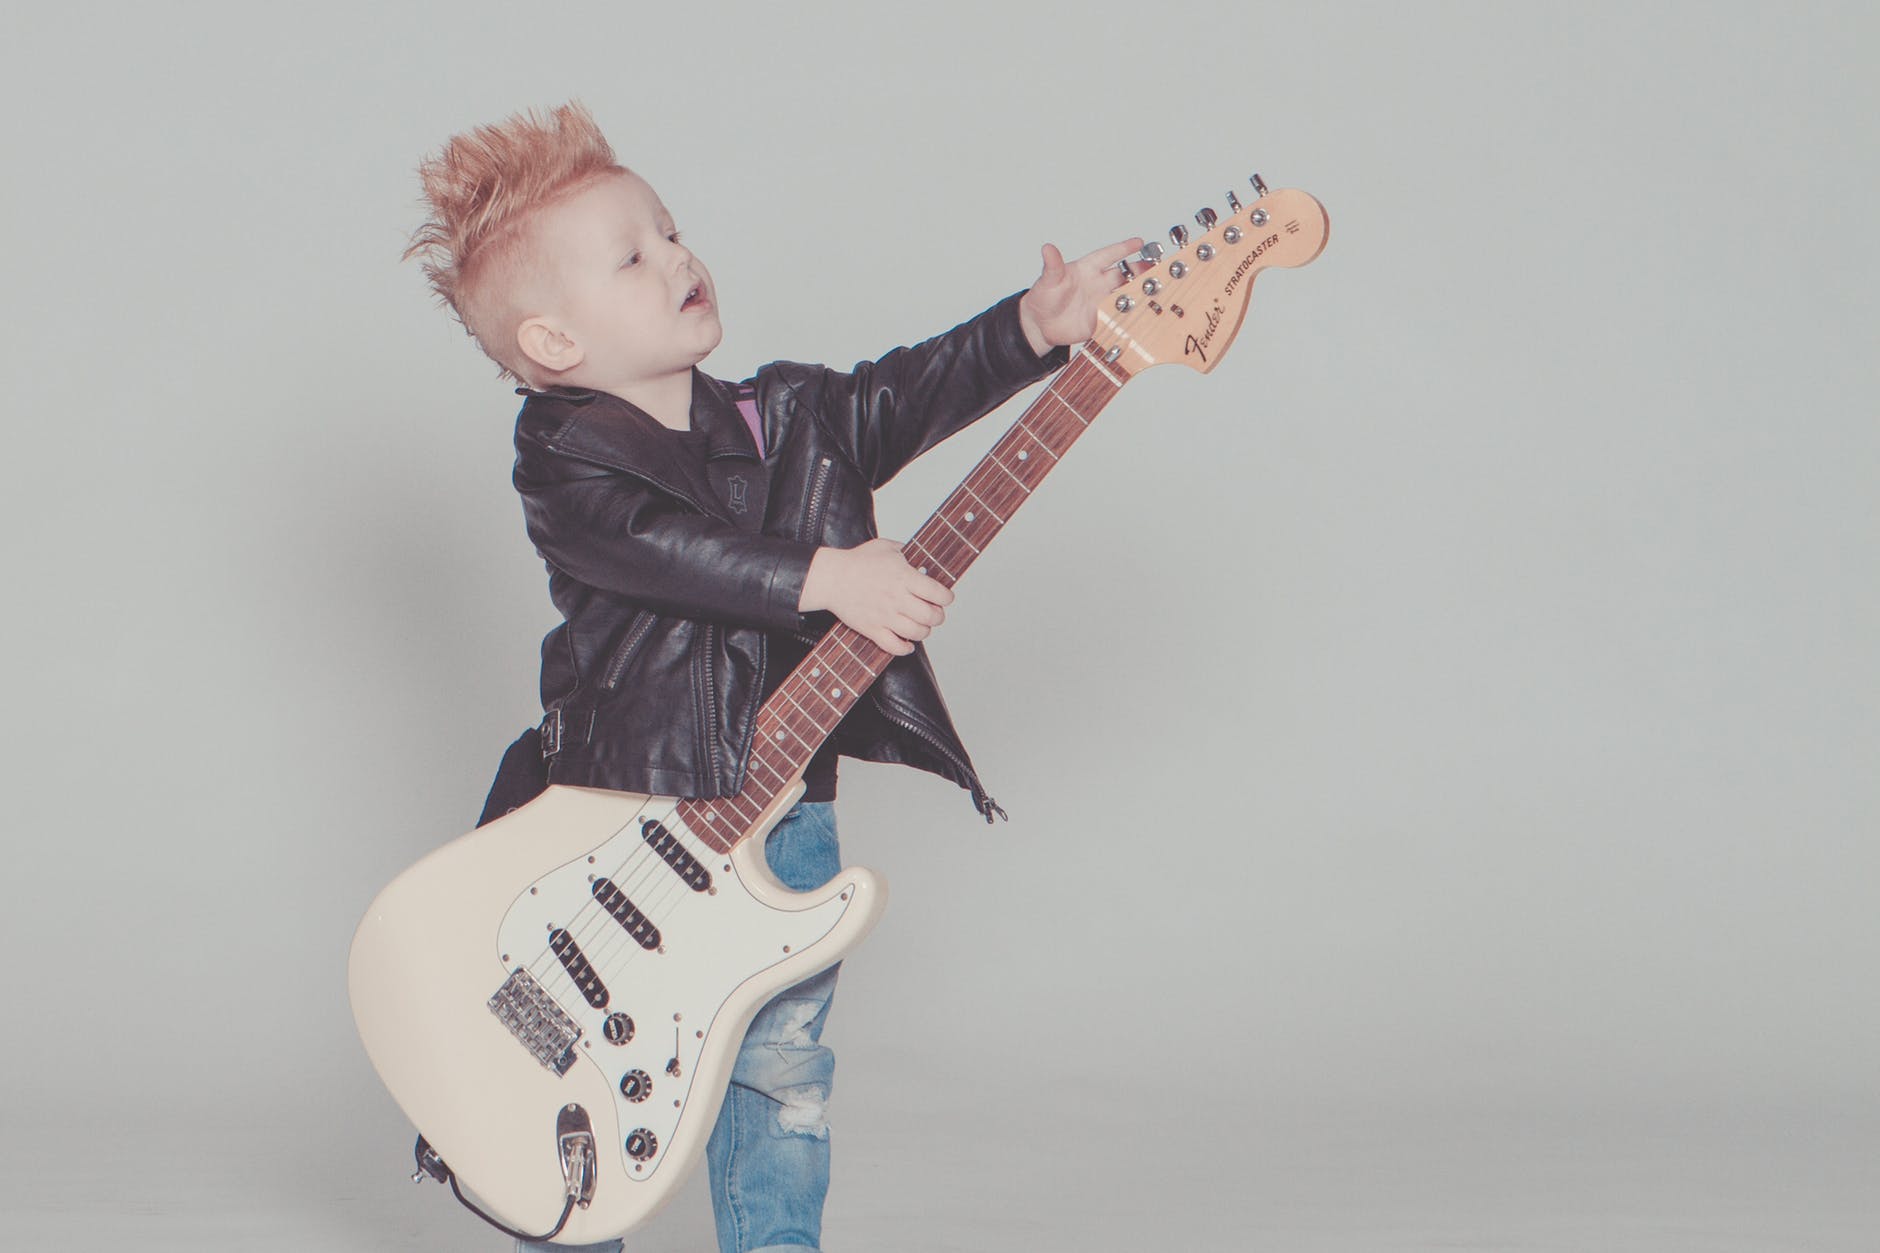 Child playing with an electric guitar.